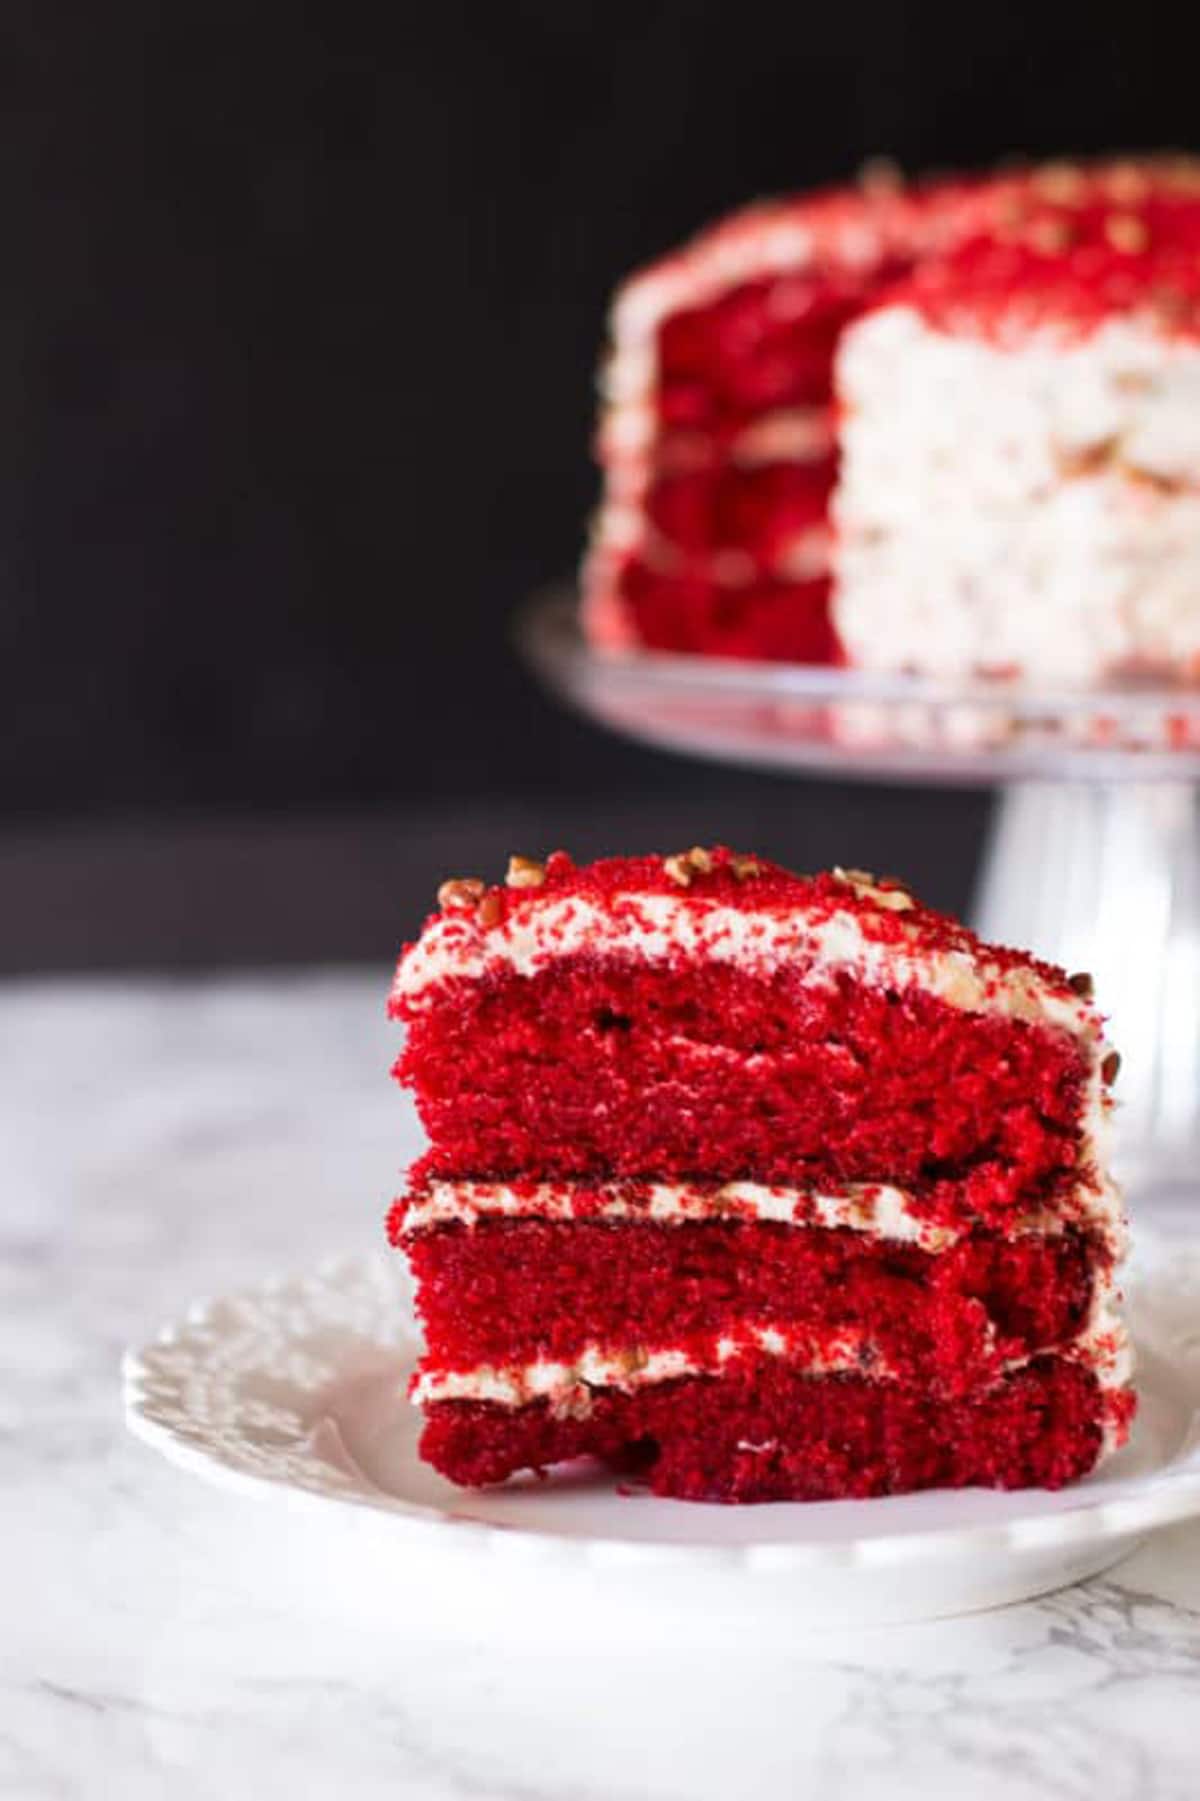 Piece of a 3 layered Red Velvet Cake sitting on a white lace plate, sliced Red Velvet Cake sitting on a glass cake dish.